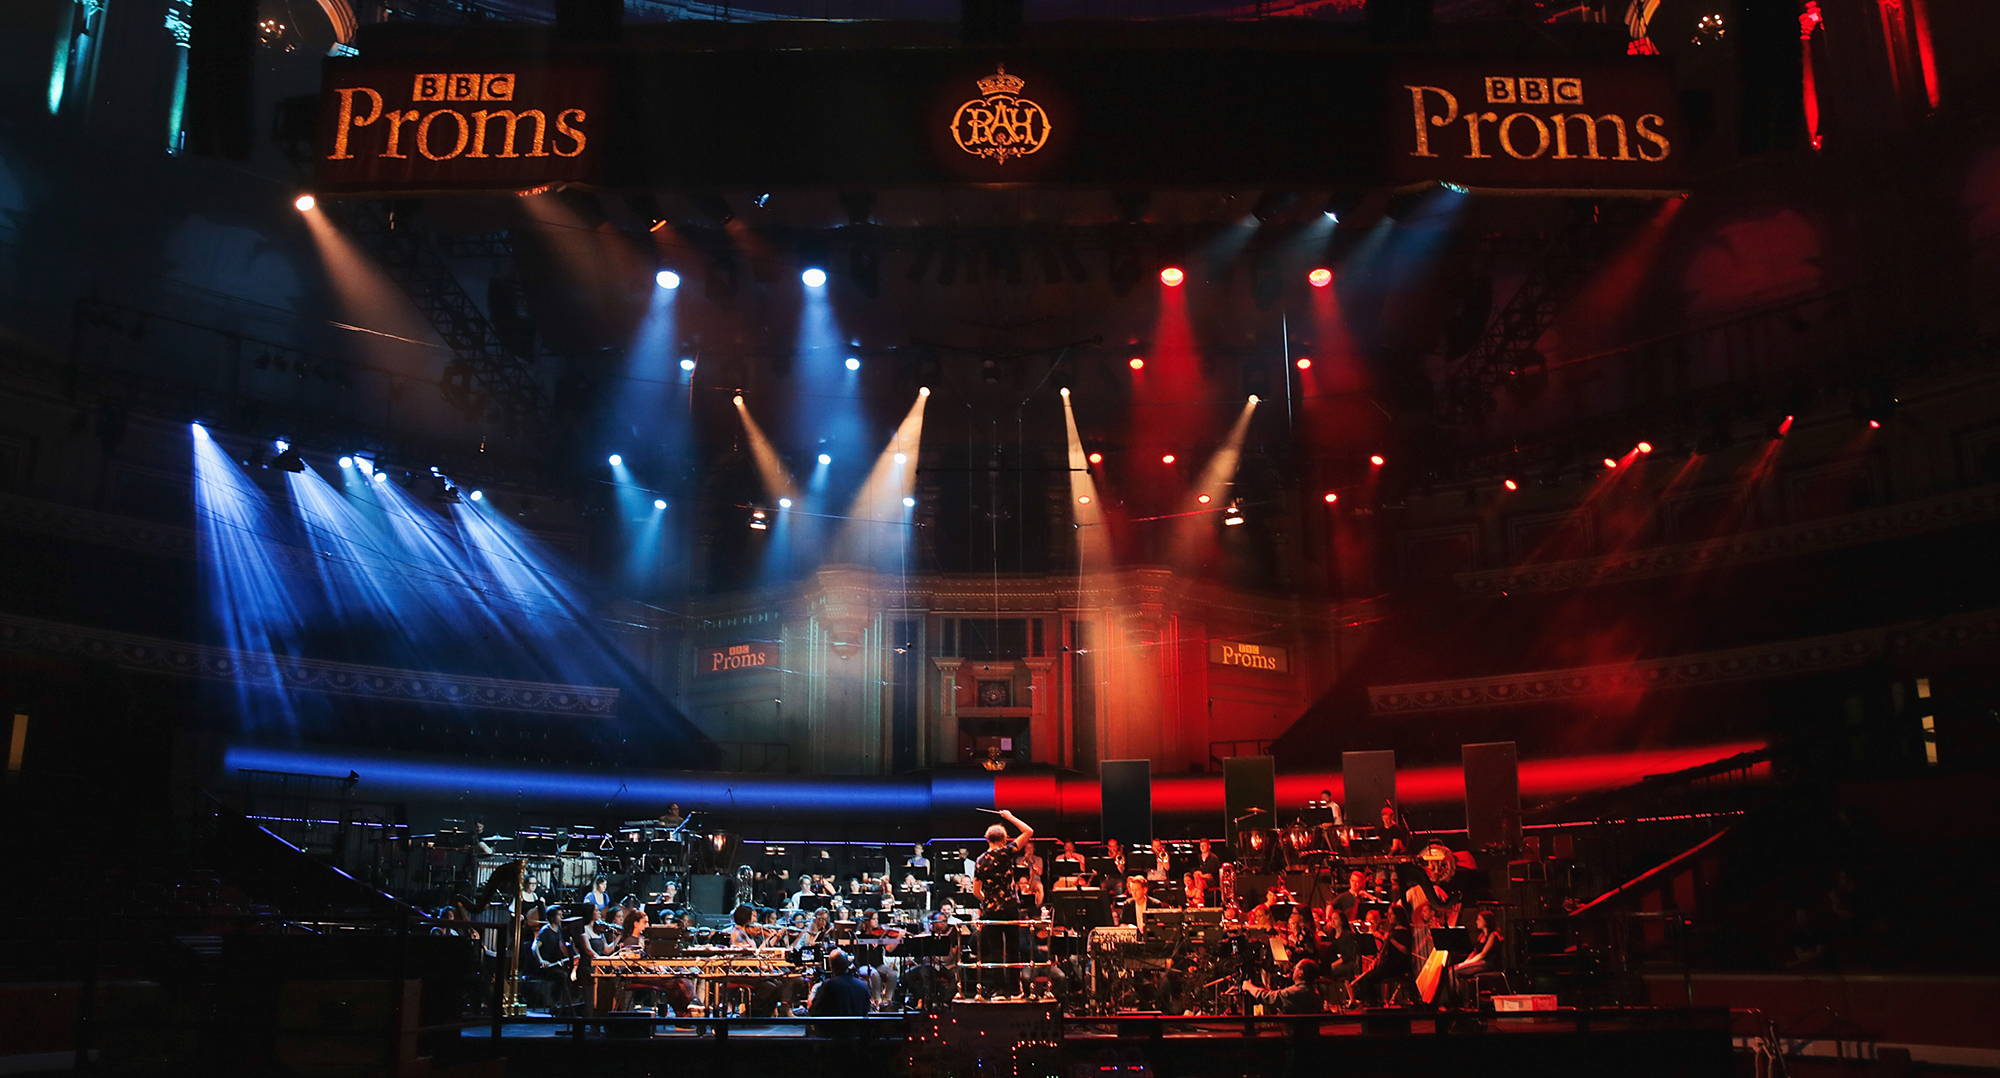 The London Contemporary Orchestra, James Bulley, and Shiva Feshareki performing Daphne Oram's 'Still Point' at the Royal Albert Hall for the BBC Proms.